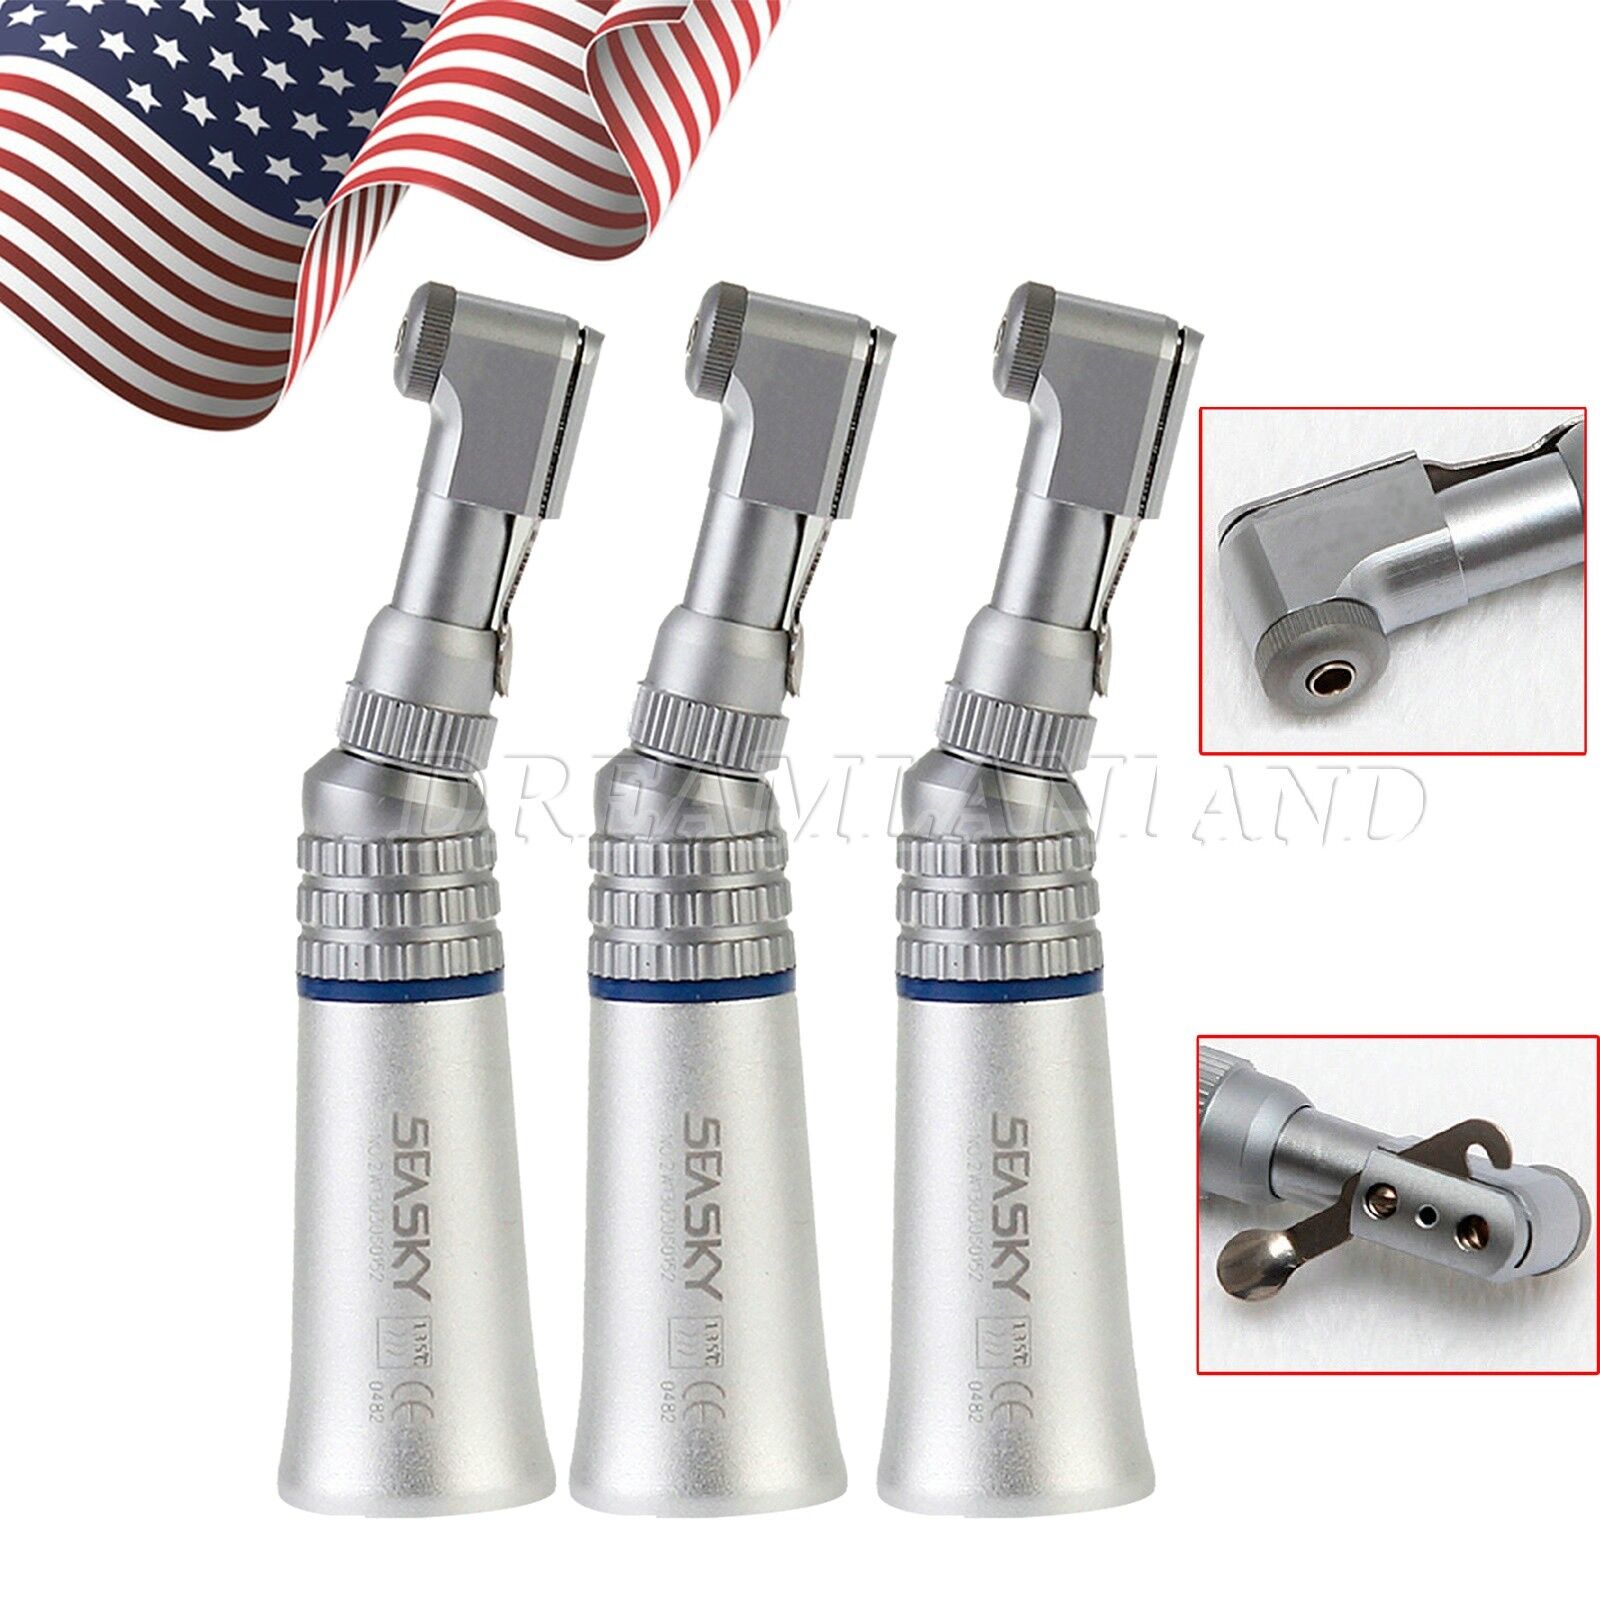 3Pack NSK Style Contra Angle Dental Low Speed Handpiece E-Type Latch MO1D